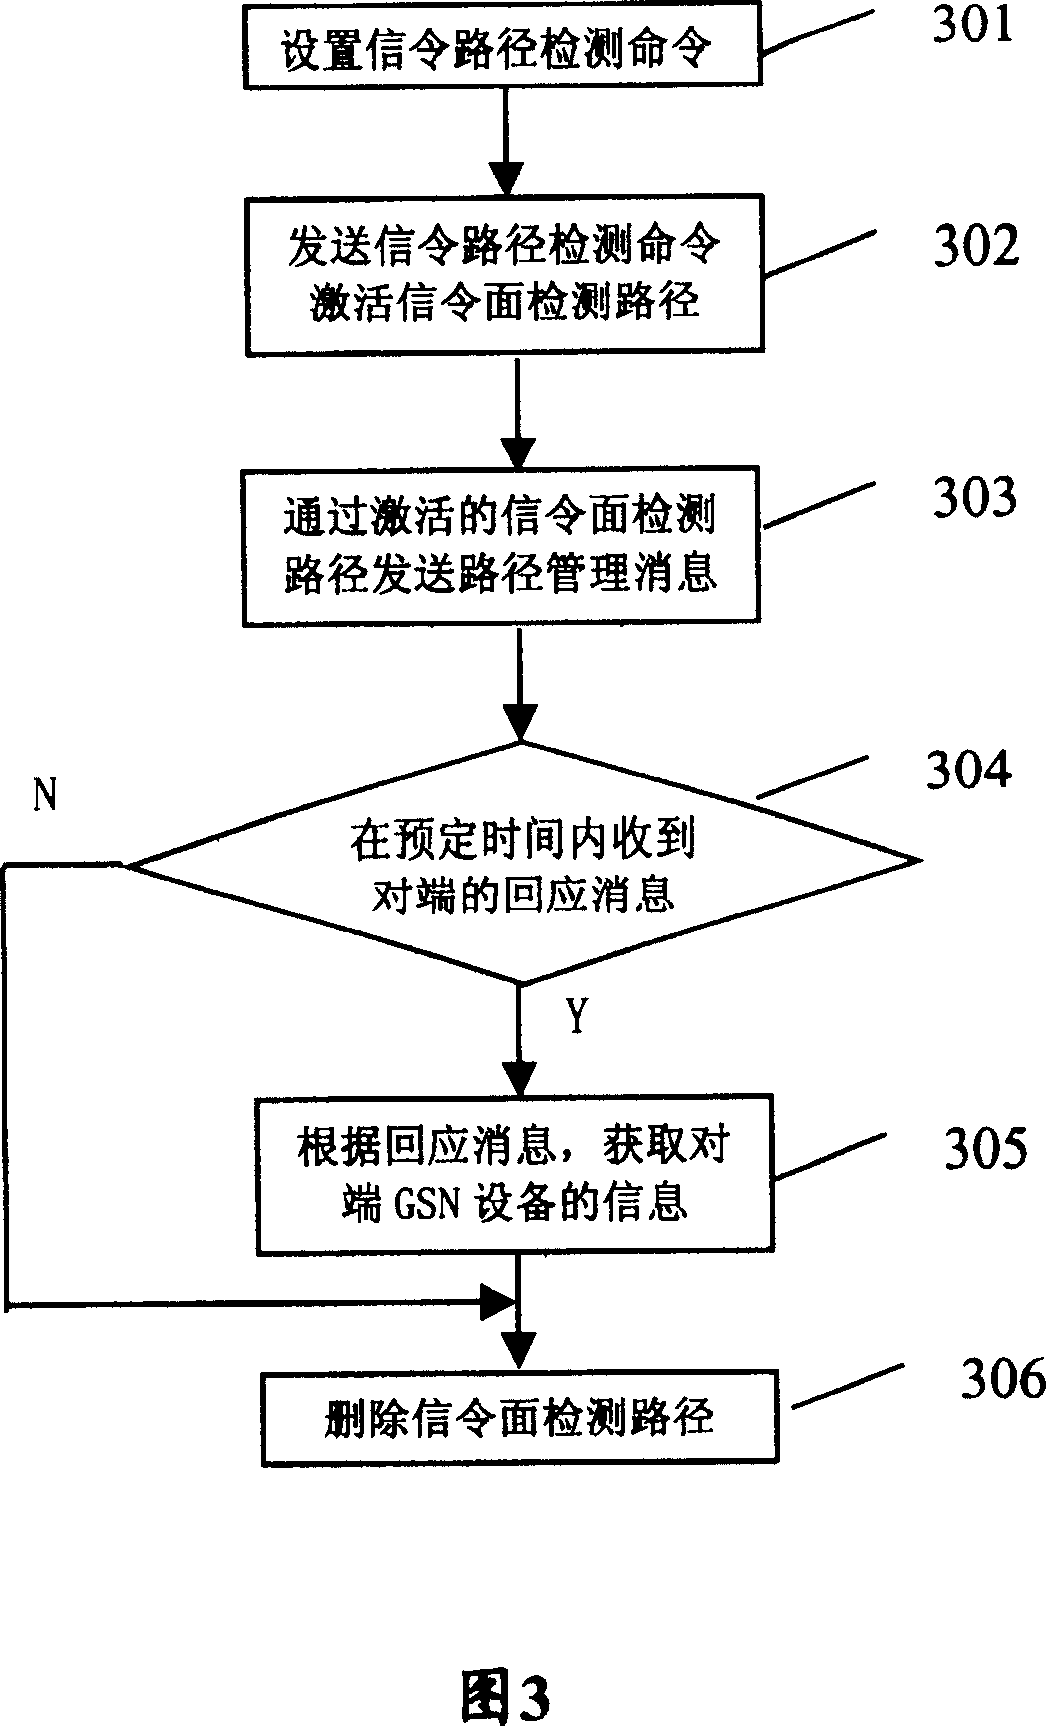 Method for detecting interface connectivity between GTP support protecol terminal equipments